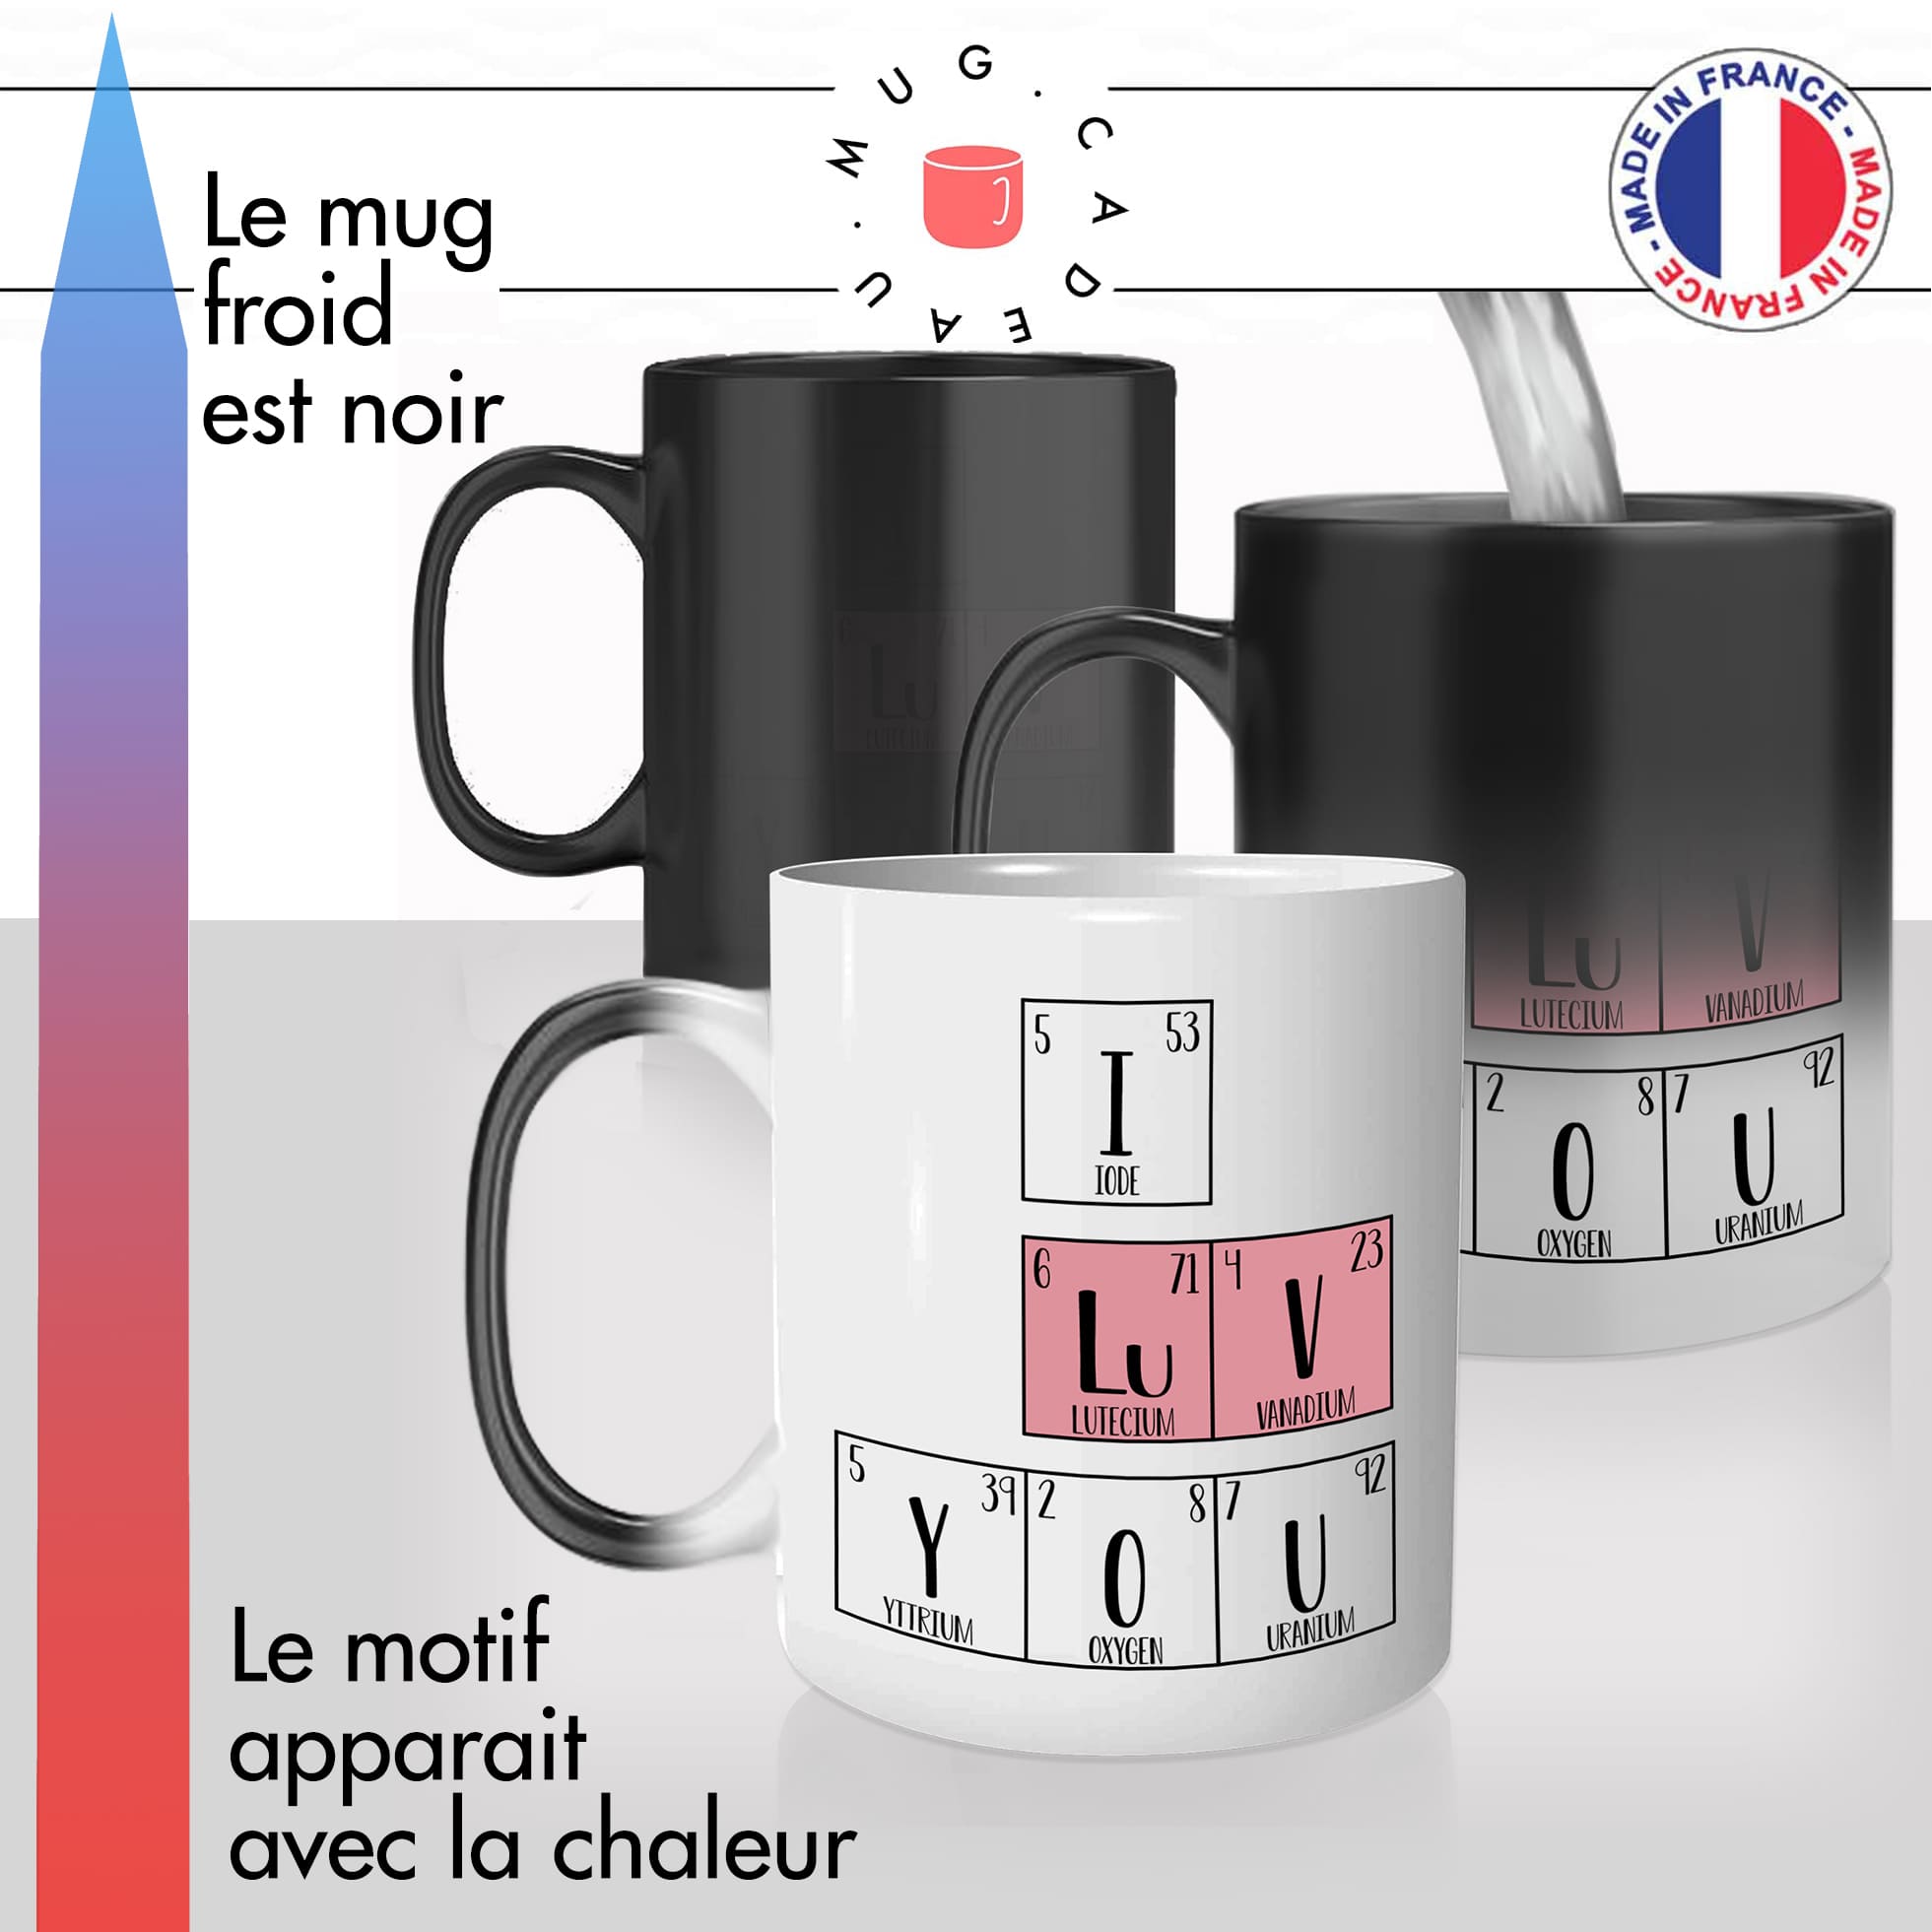 mug magique thermo chauffant thermoreactif tasse i love you geek elements science mignon amour fun